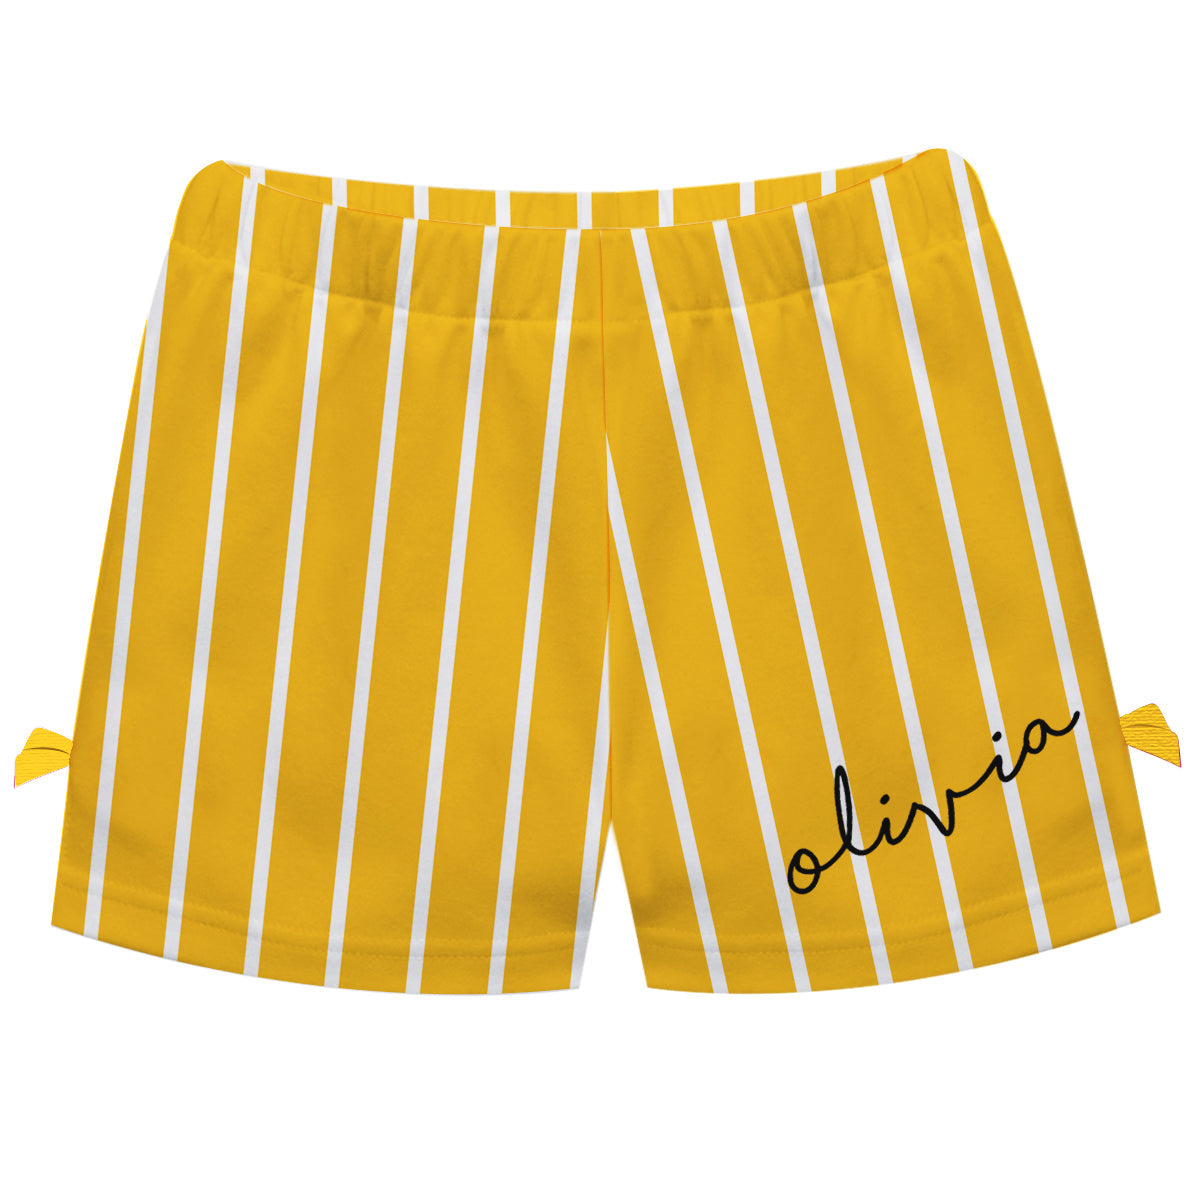 Girls yellow and white striped short with name - Wimziy&Co.